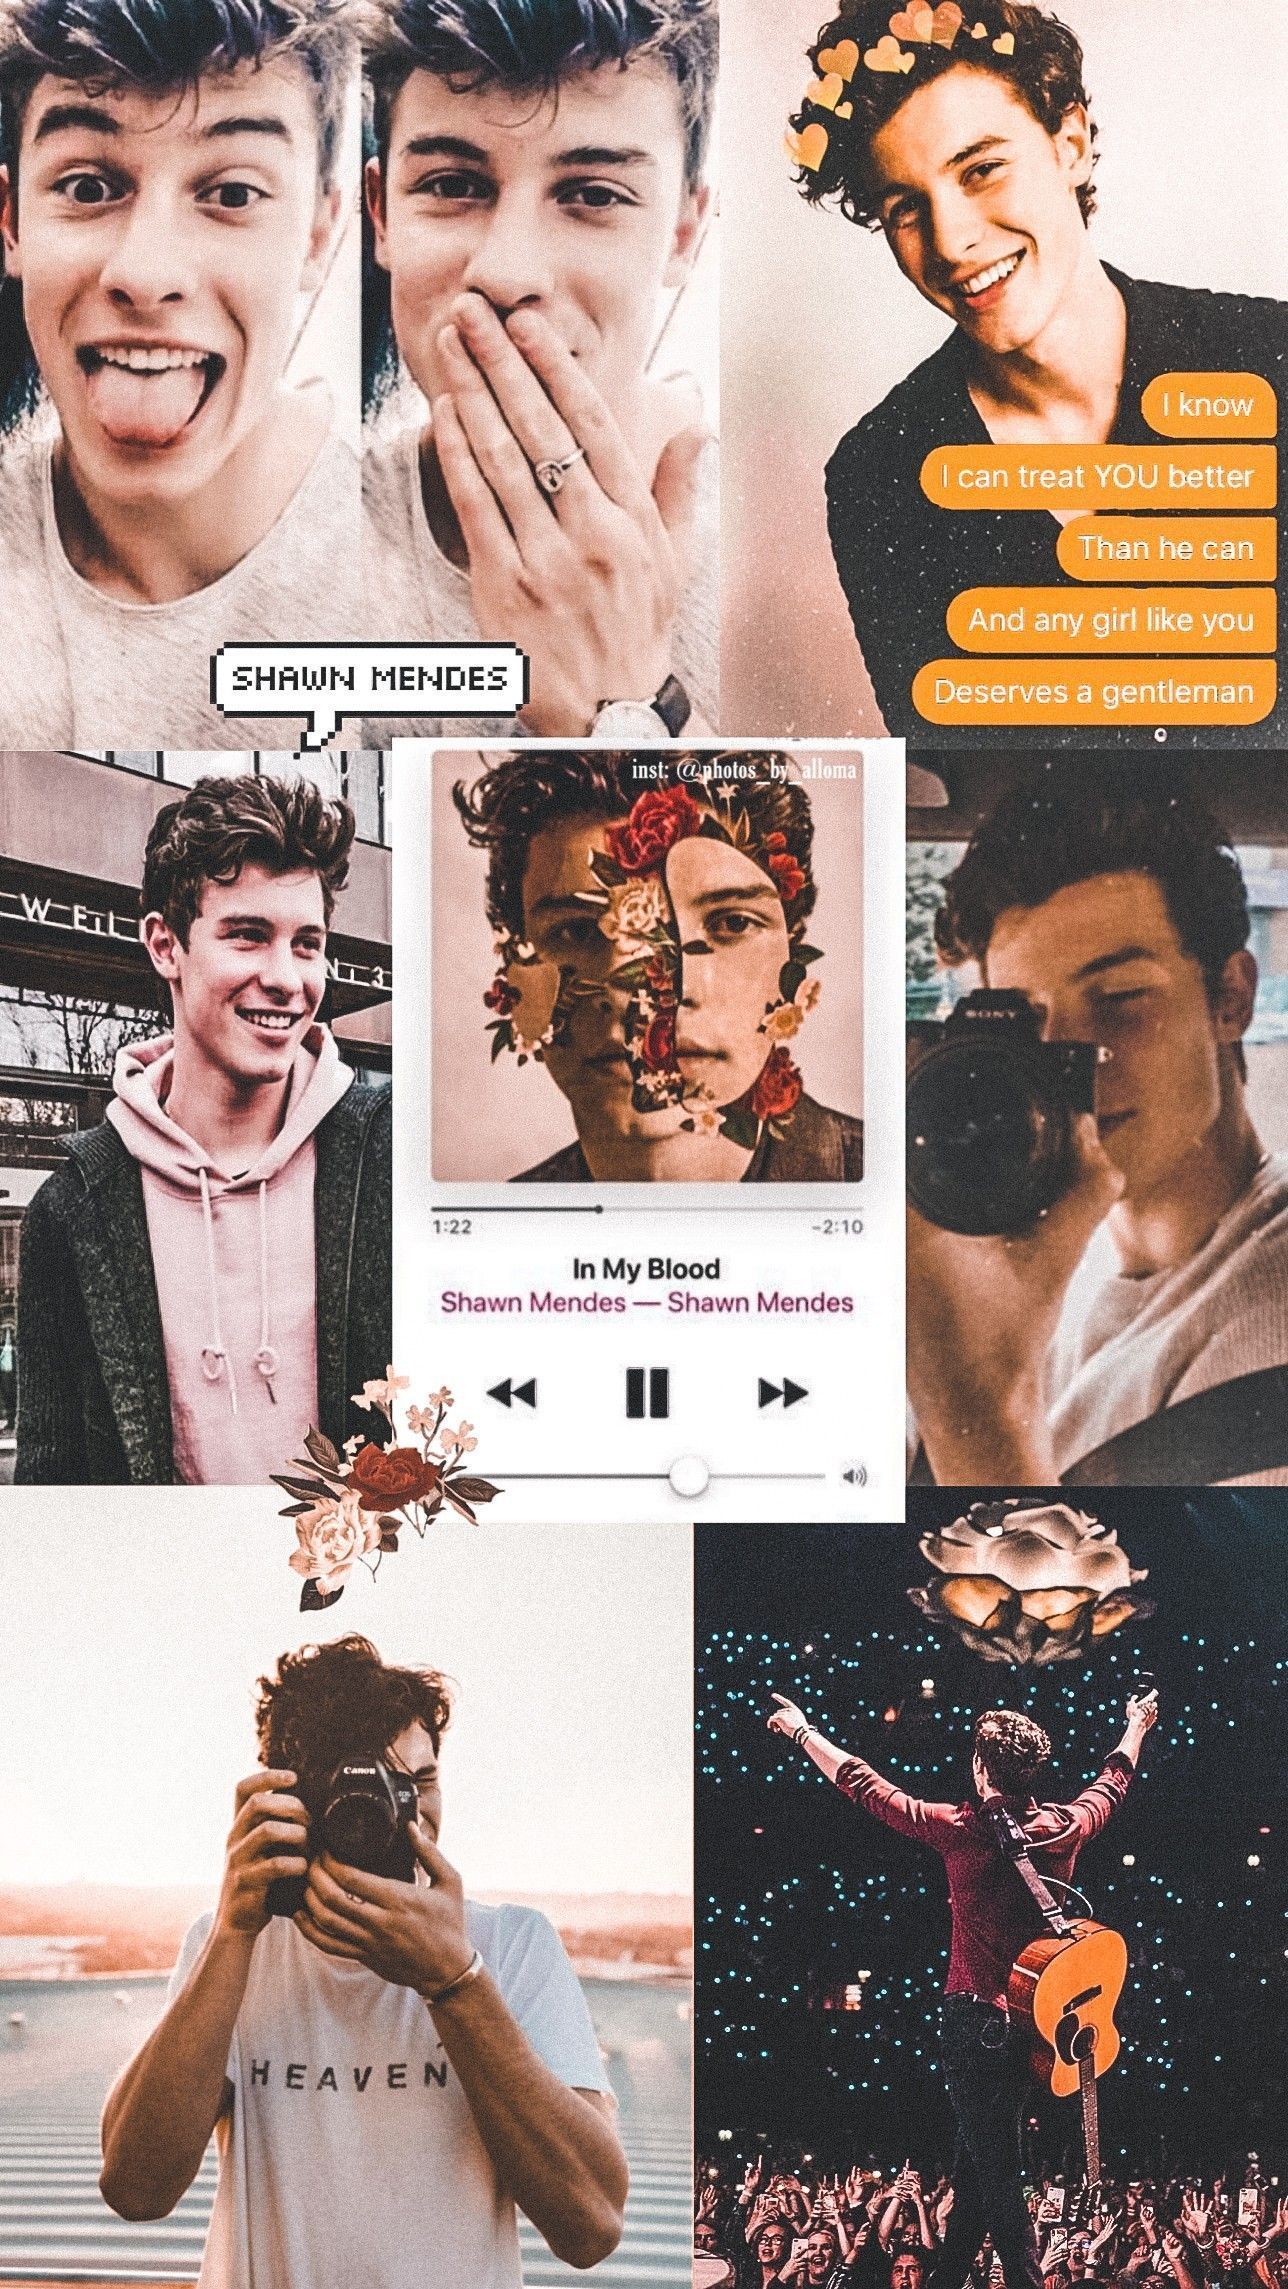 A collage of Shawn Mendes photos with a quote from his song In My Blood. - Shawn Mendes